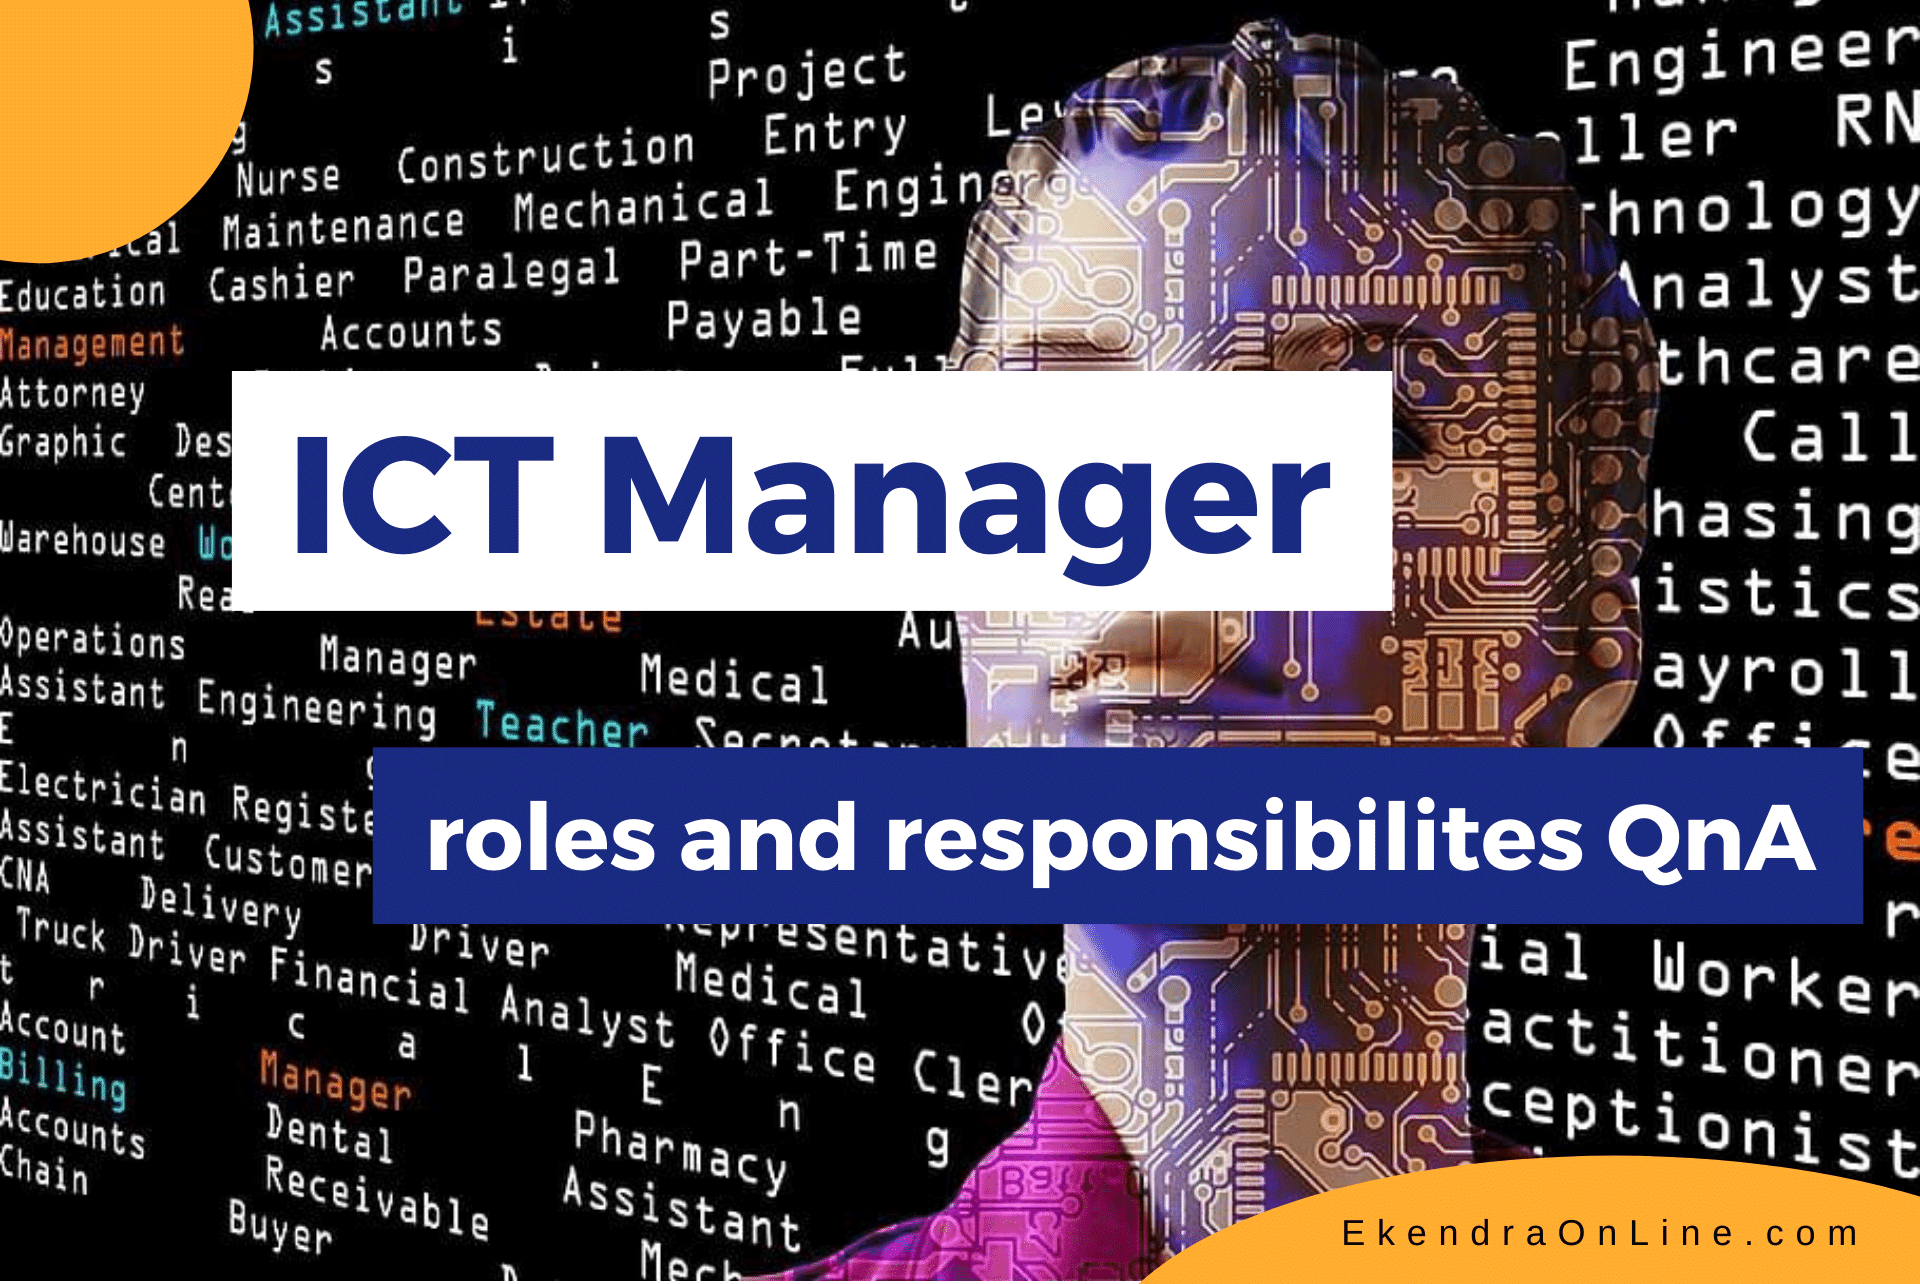 ICT Managers - roles and responsibilities QnA, an illustration